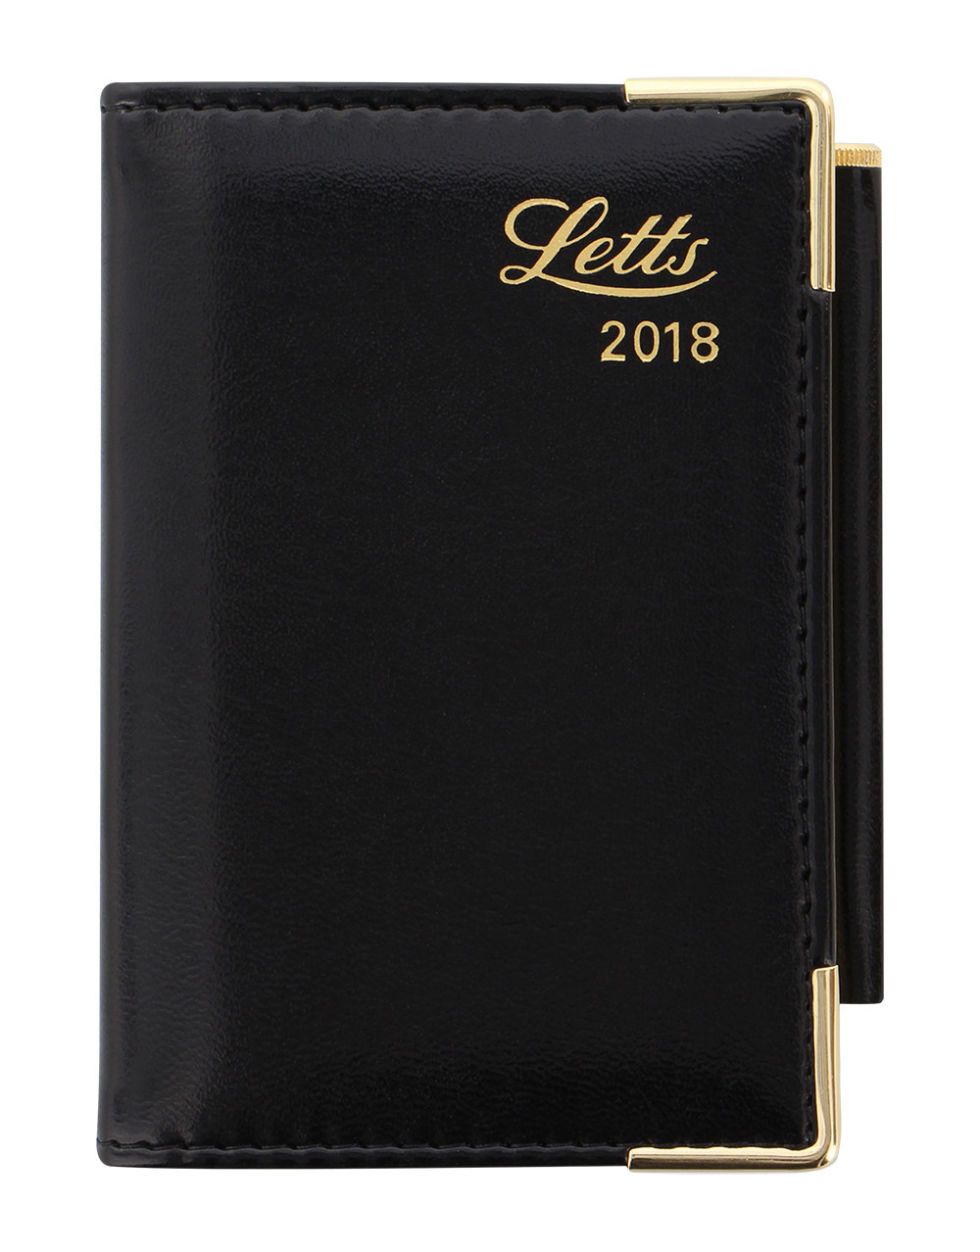 <p>Letts, € 20 via <a href="https://www.letts.co.uk/index.php/lexicon-mini-pocket-week-to-view-diary-2018-black.html" class="OWAAutoLink" id="LPlnk518930">etts.co.uk</a></p>